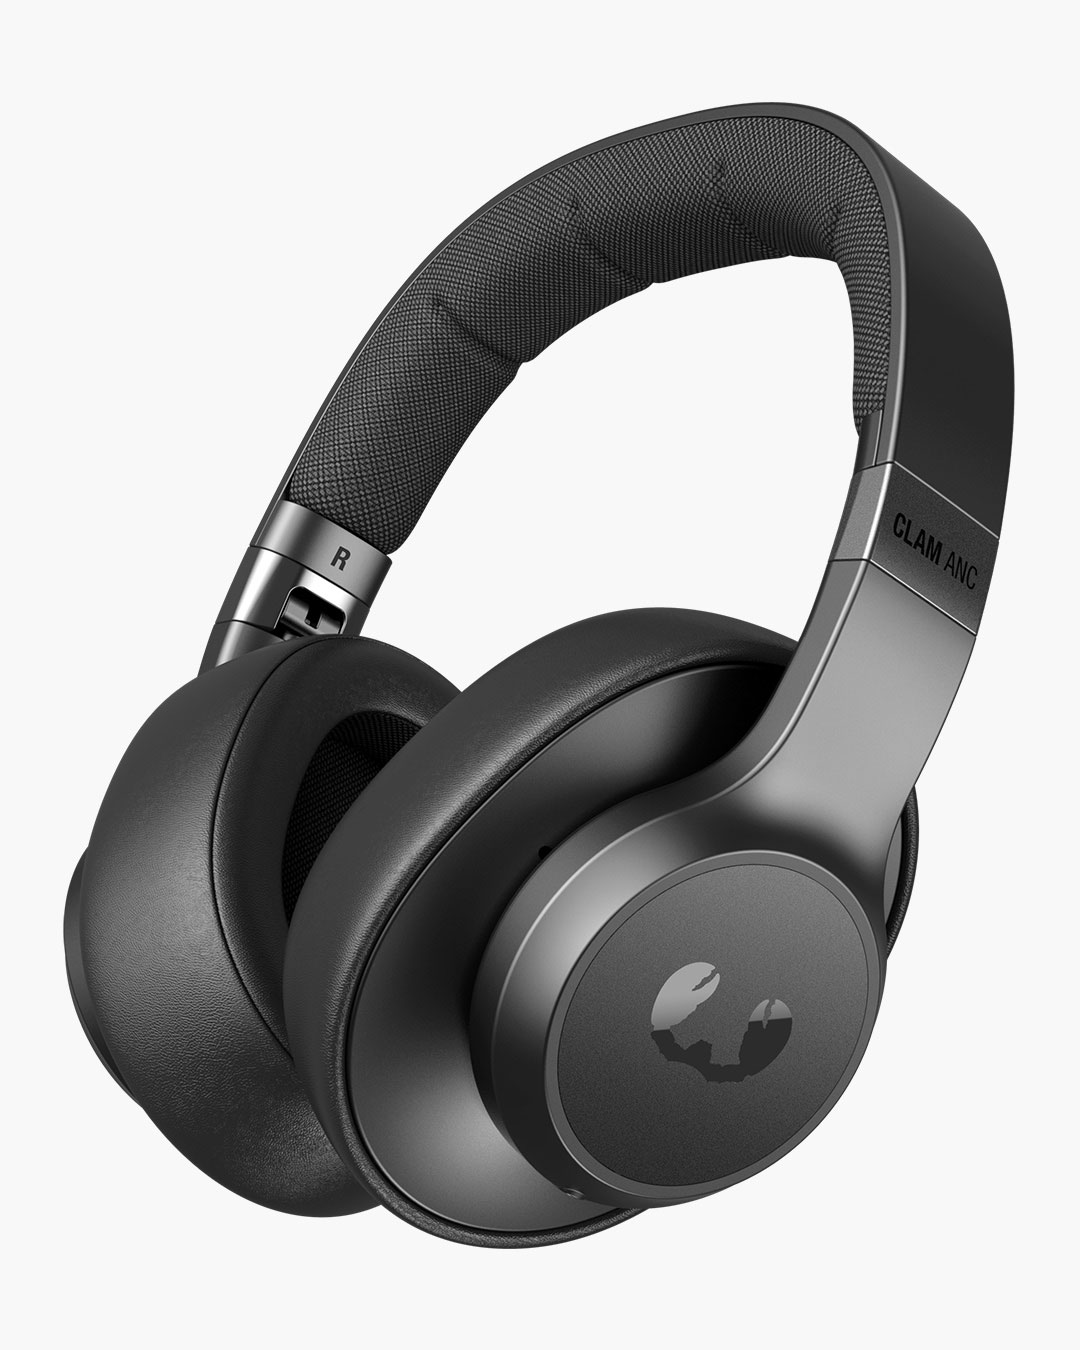 Fresh 'n Rebel - Clam ANC - Wireless over-ear headphones with active noise cancelling - Storm Grey